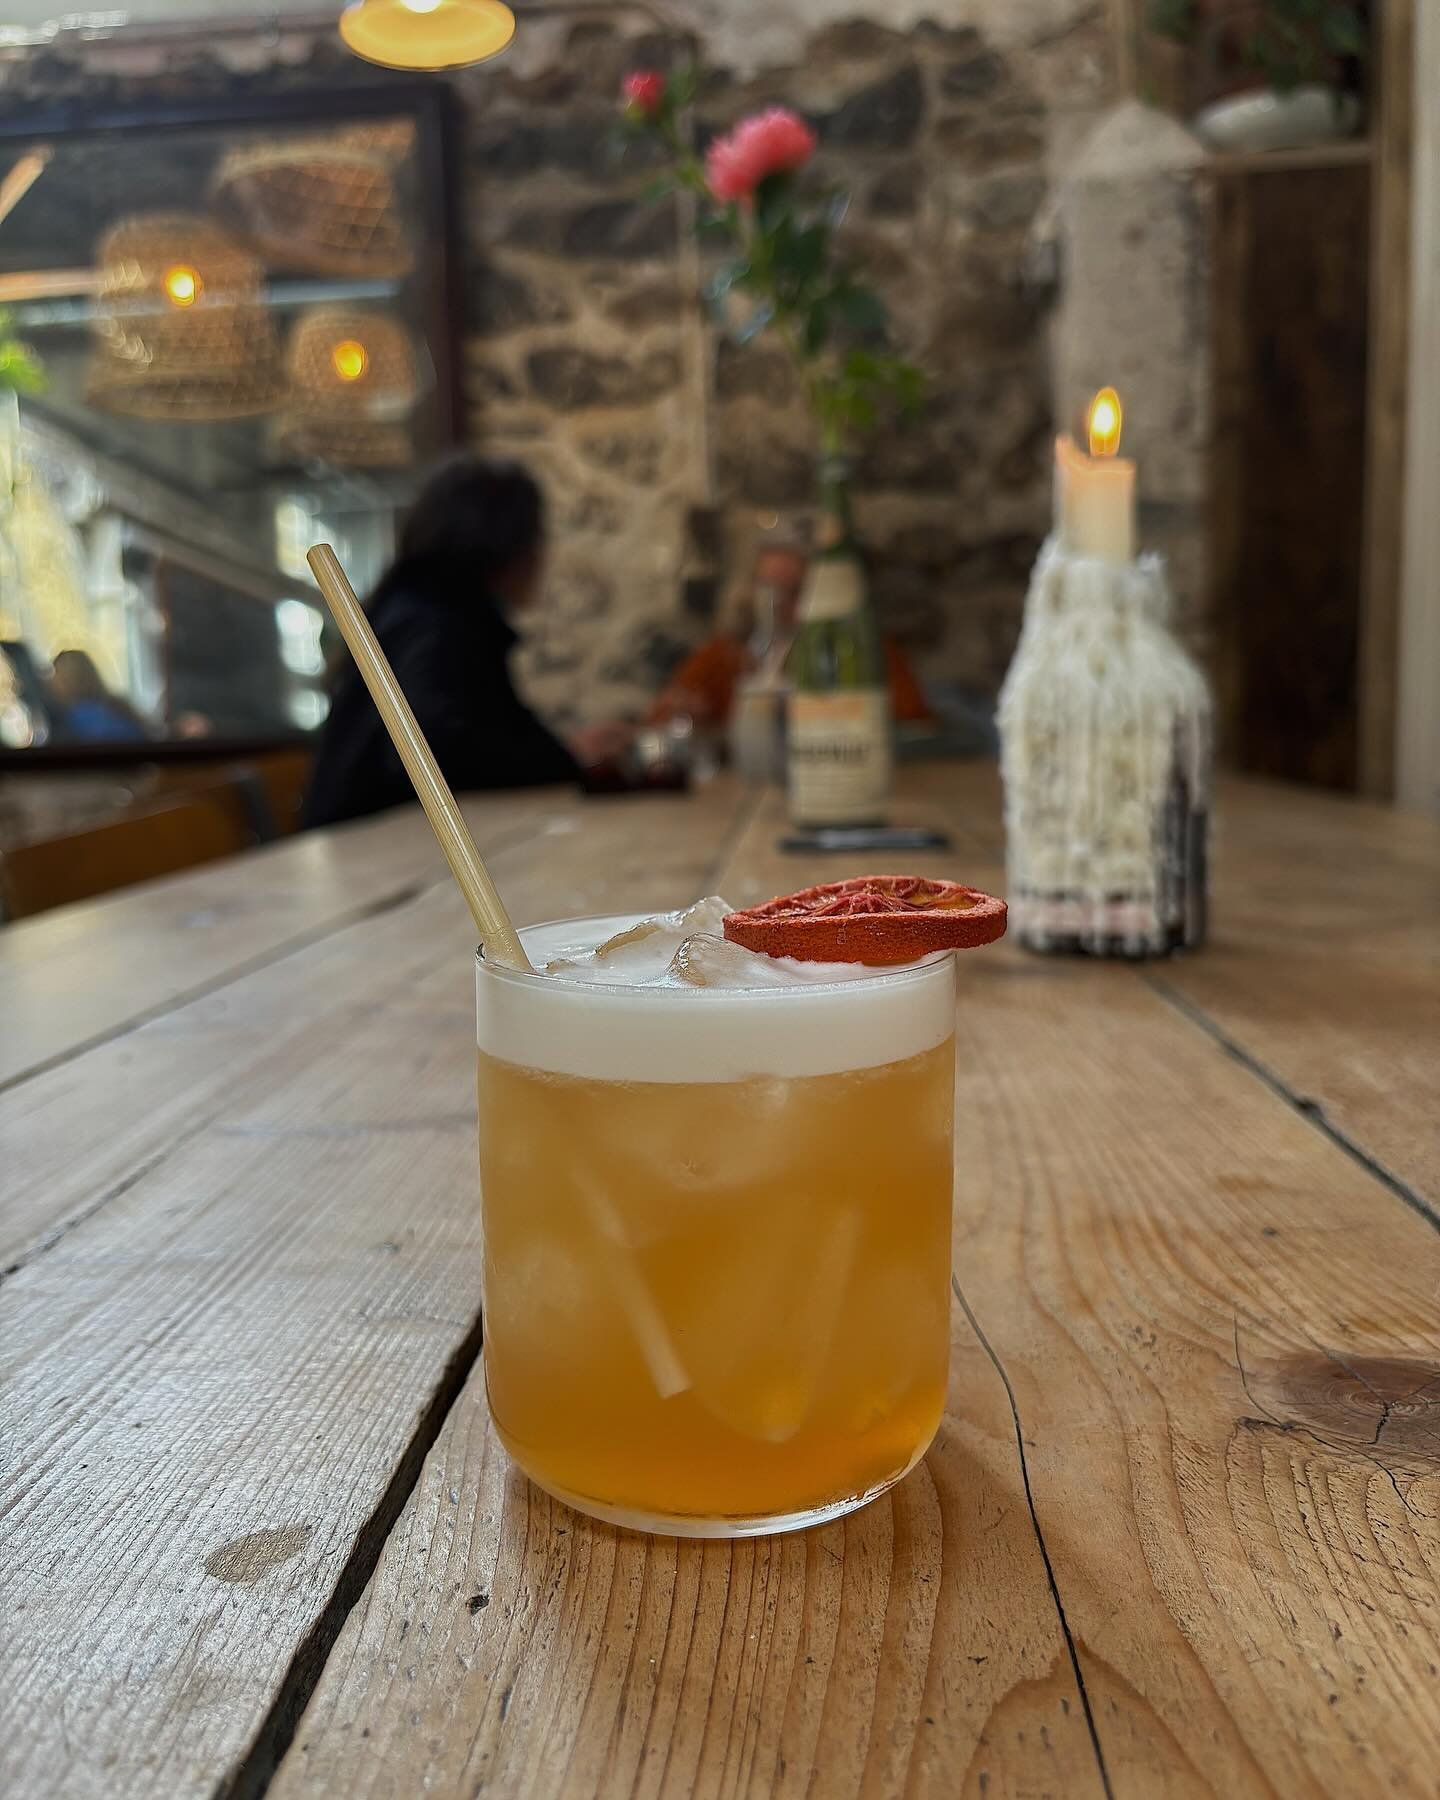 Our Zero Waste Sour. 

Michael @academyofalchemists has been toiling away with new recipes, he&rsquo;s on a mission to limit waste, buying local (often organic) fruit and veg and flowers along with foraging and exploring all sorts of ways to preserve